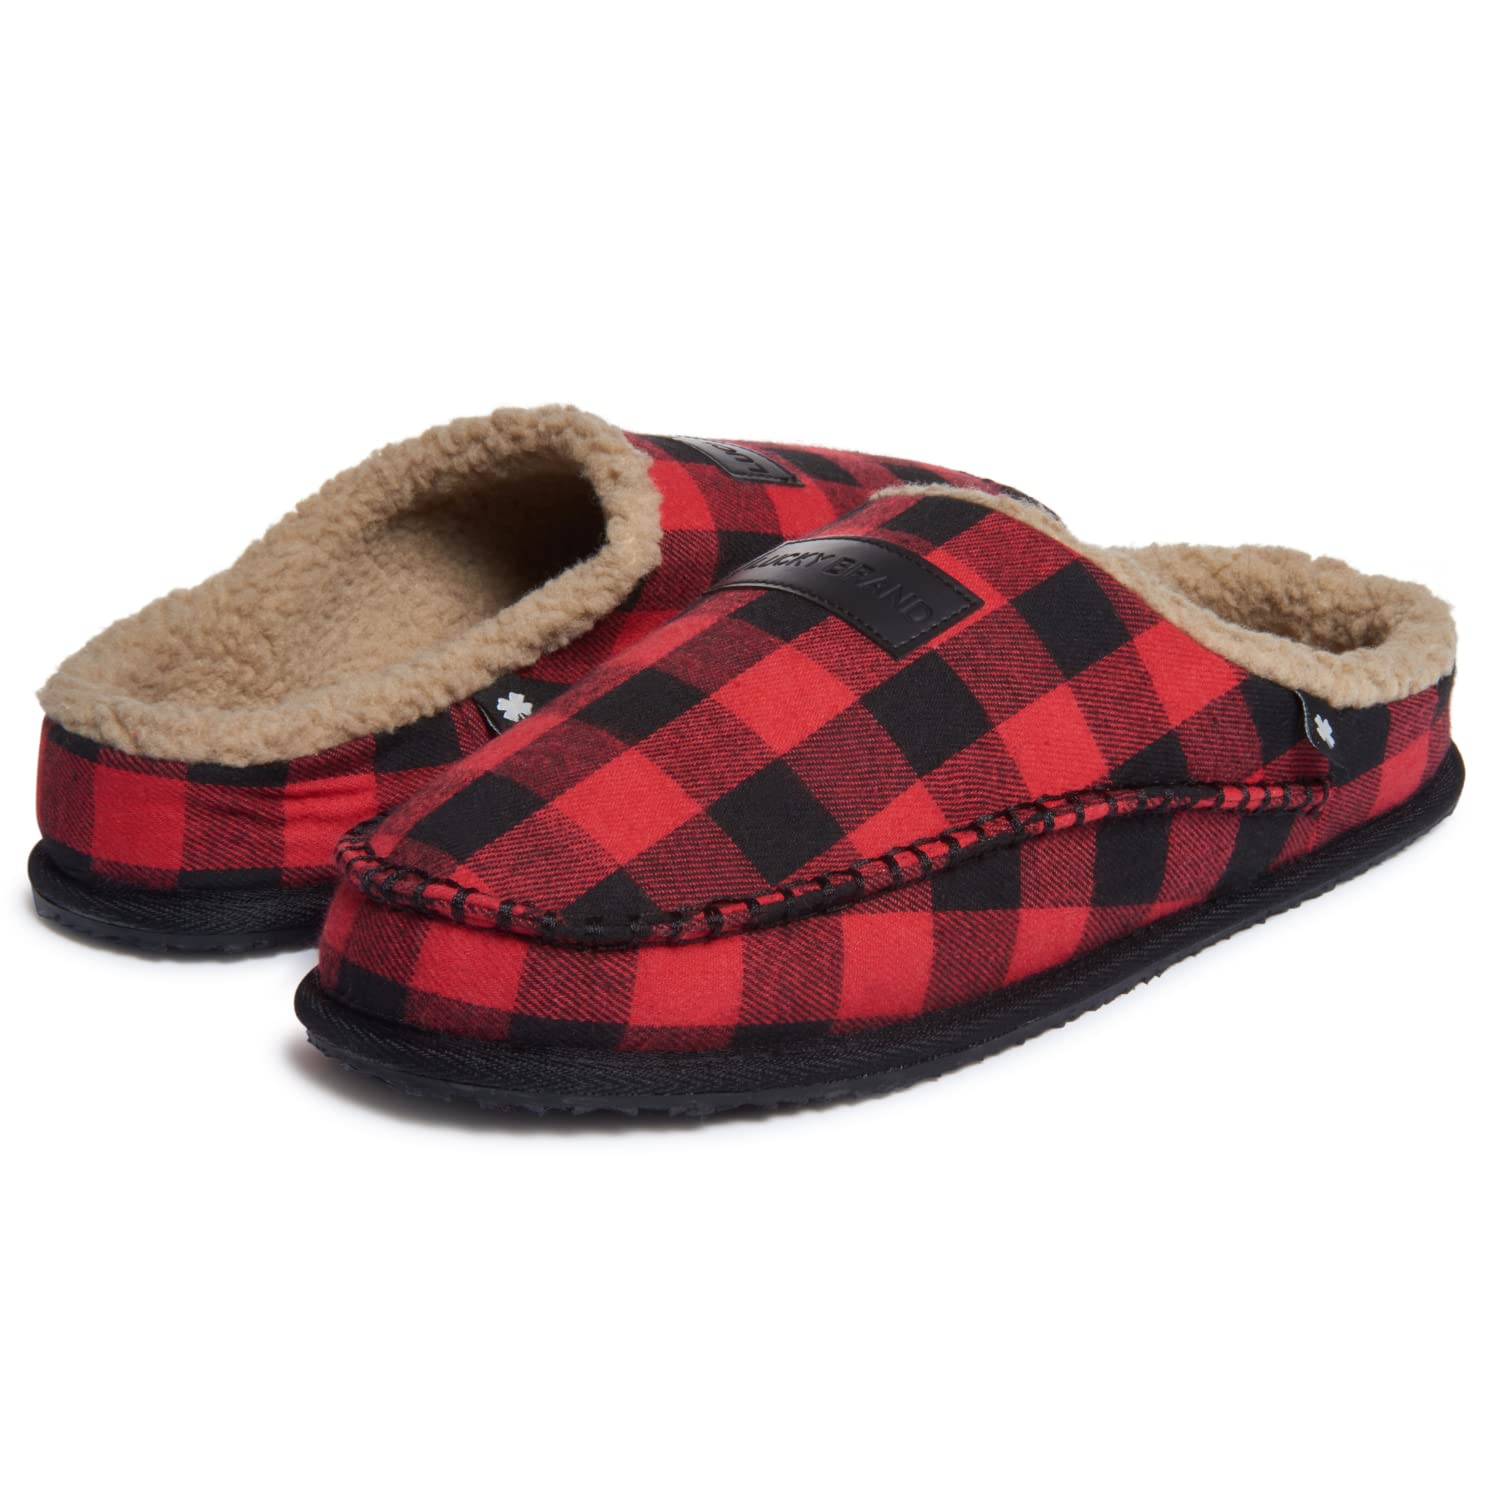 Lucky Brand Men's Plaid Memory Foam Slip On Clog Slippers, Indoor Outdoor Mens House Shoes, Warm Bedroom Clogs Slipper for Men, Red, Large